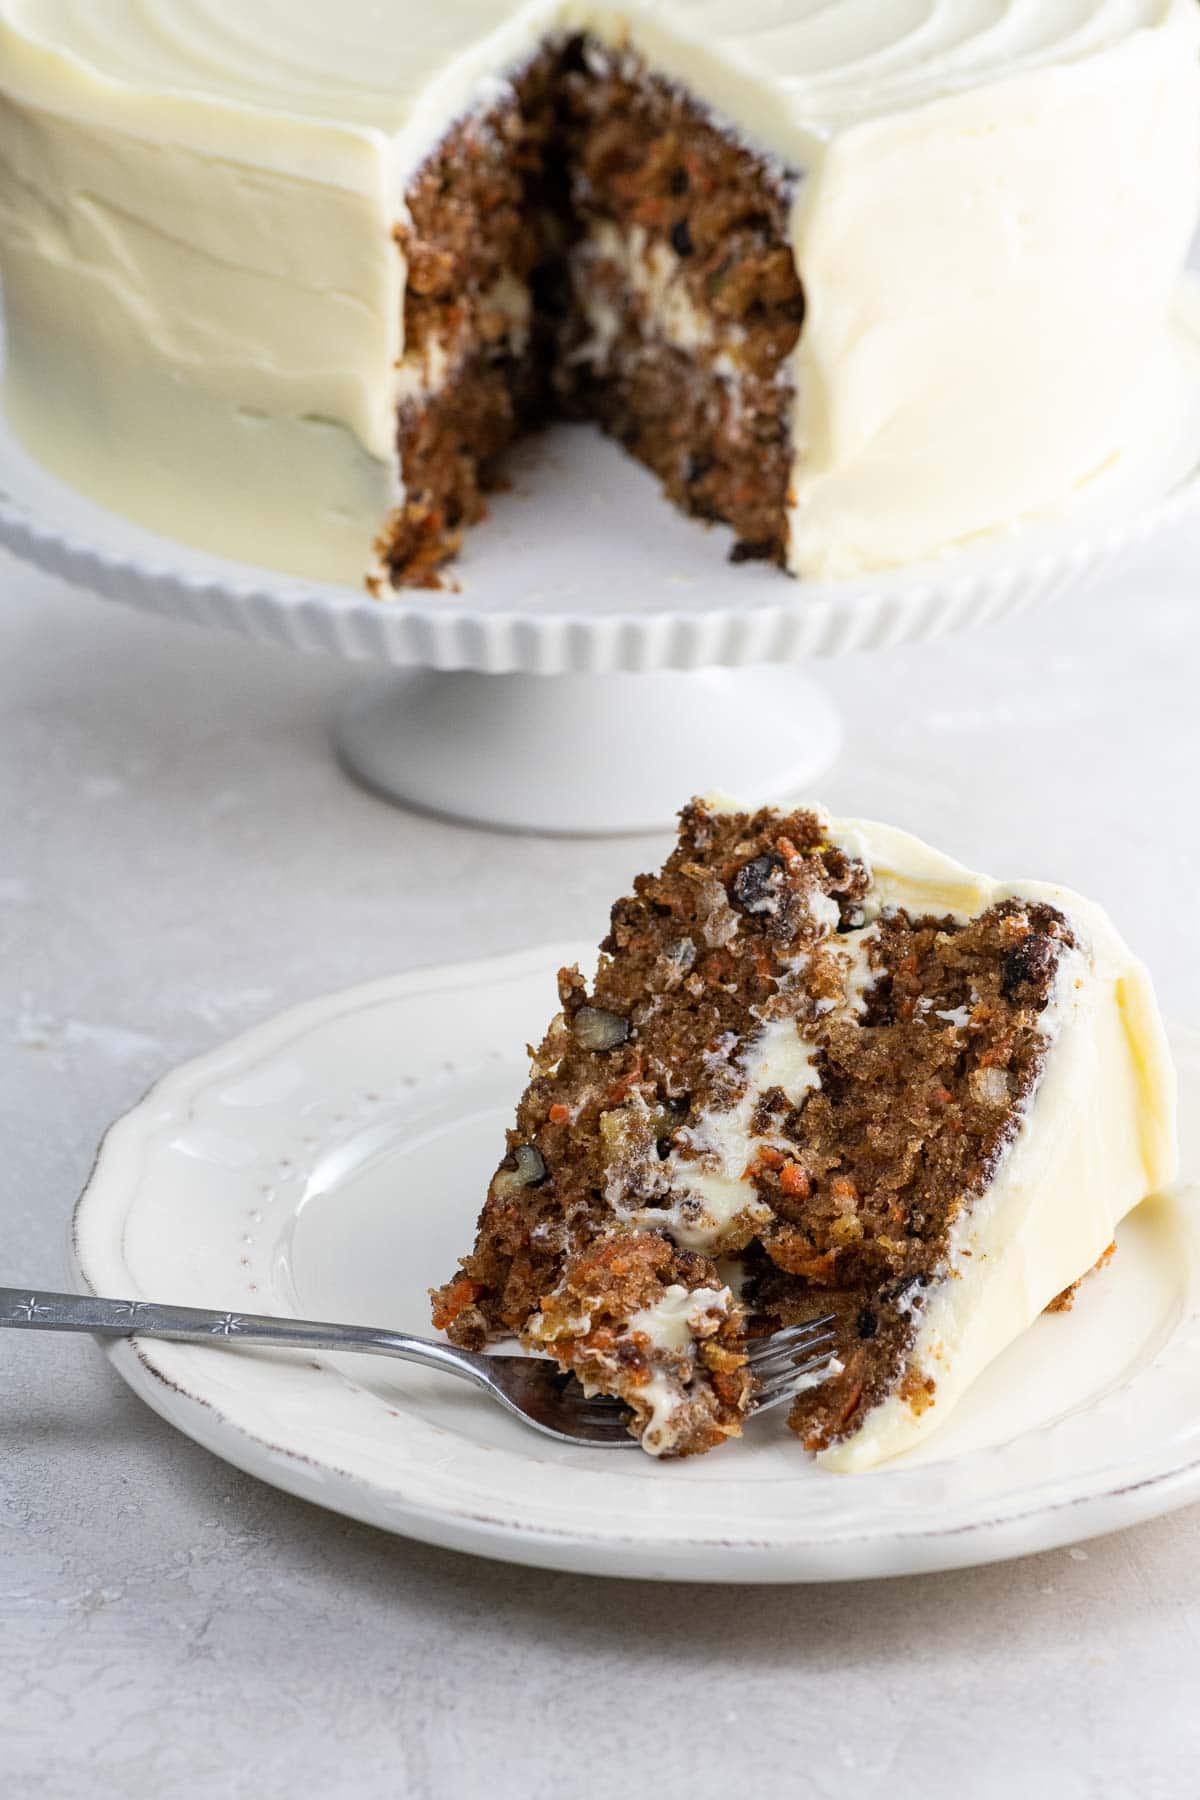 a slice of old fashioned carrot cake with not too sweet cream cheese frosting on a plate, with the whole cake behind it on a cake stand